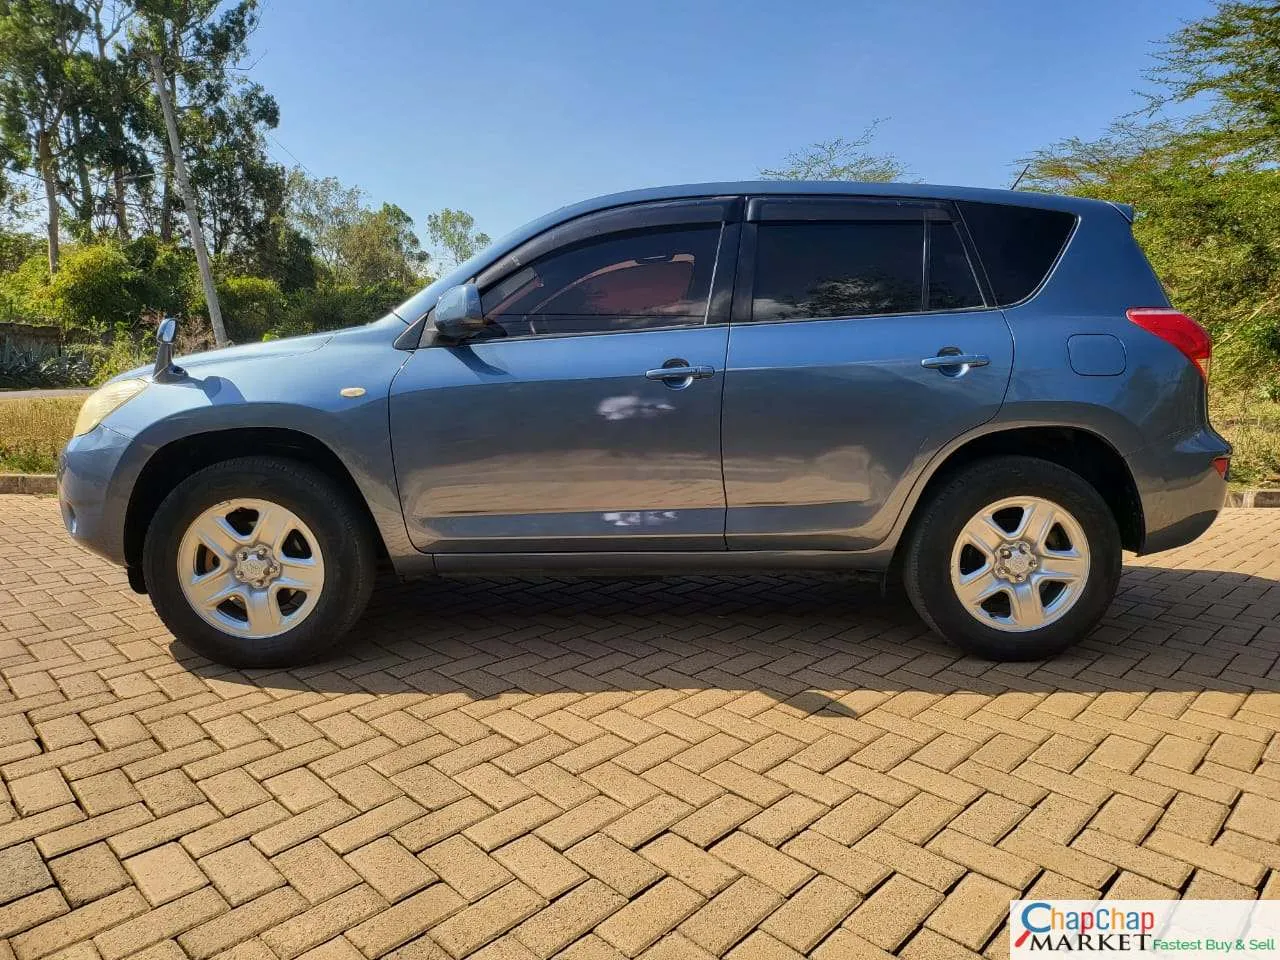 Cars Cars For Sale-Toyota RAV4 kenya CHEAPEST You Pay 30% Deposit Trade in OK Toyota RAV4 for sale in kenya hire purchase installments EXCLUSIVE 9